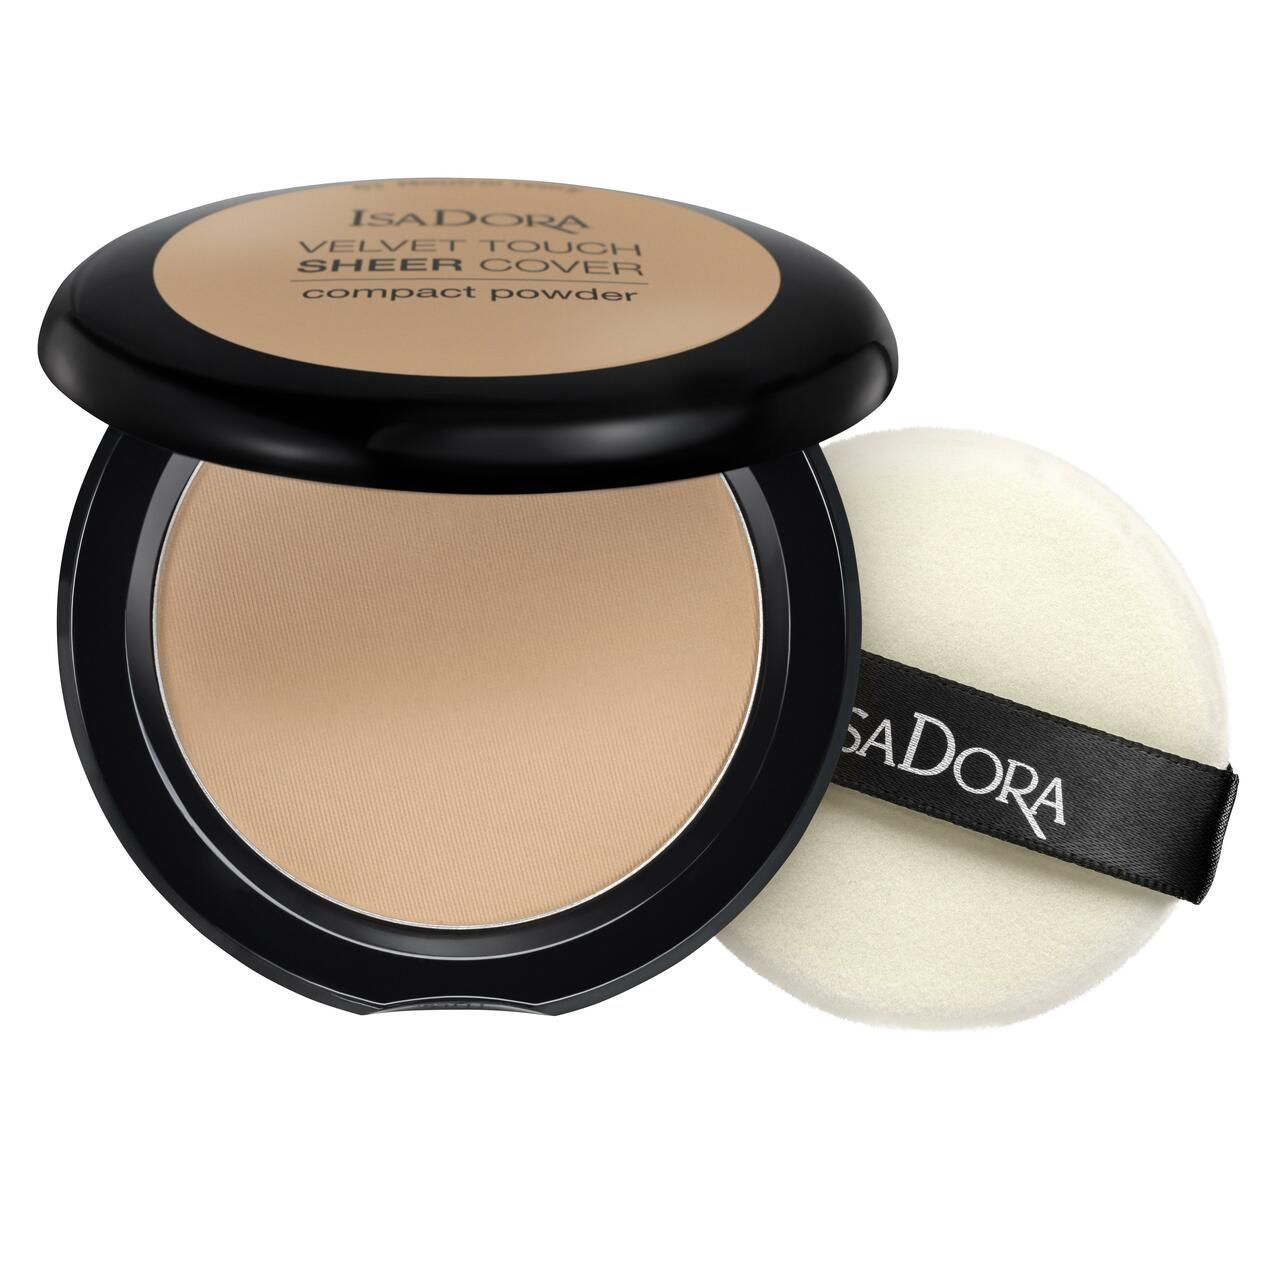 IsaDora, Velvet Touch Sheer Cover Compact Powder